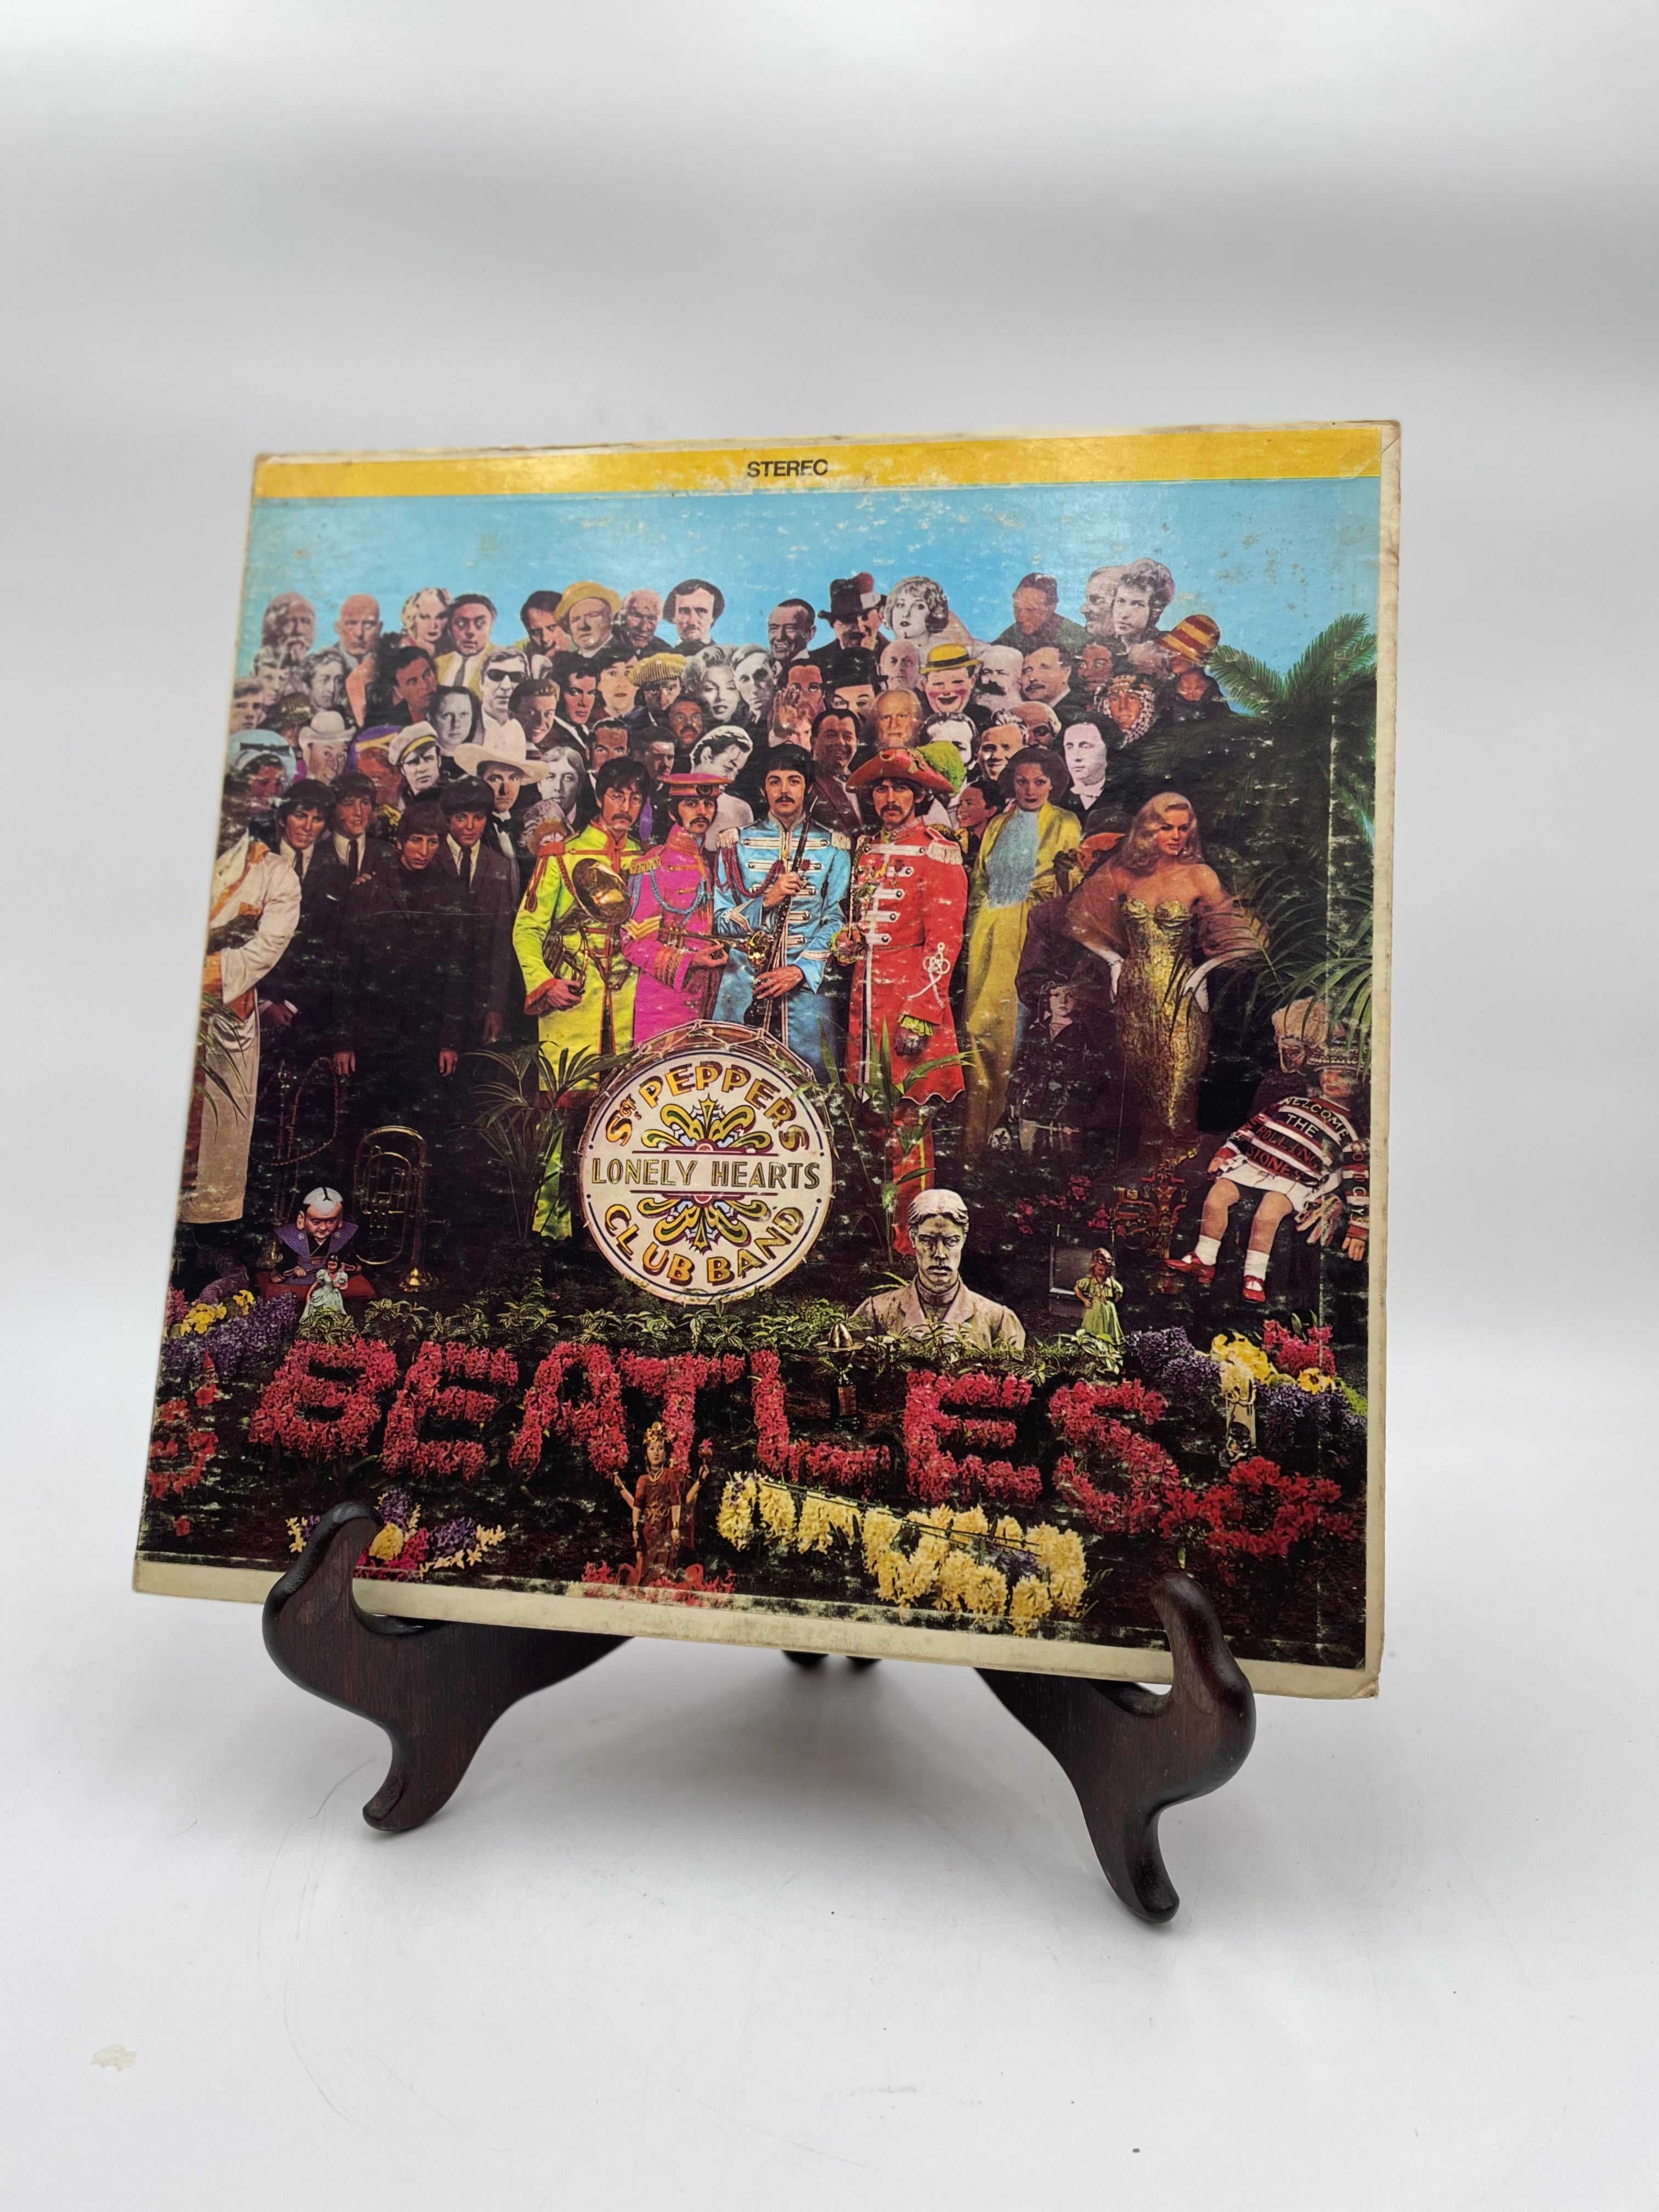 The Beatles - Sgt. Pepper's Lonely Hearts Club Band - Vinyl